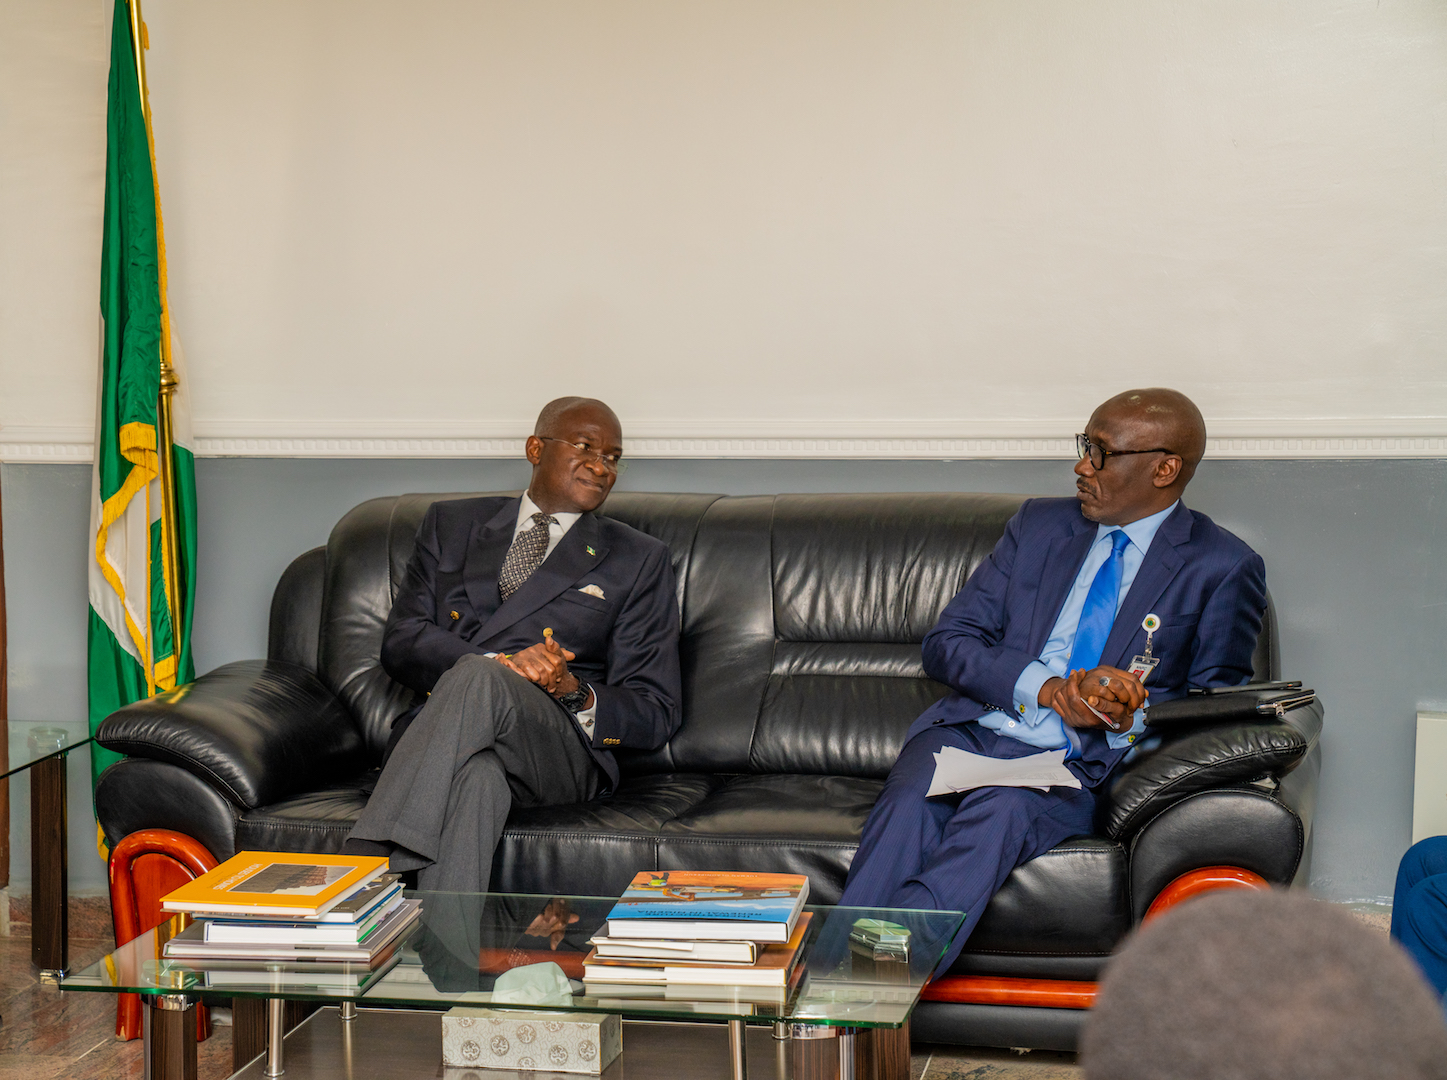 Hon. Minister of Works & Housing, Mr Babatunde Fashola,SAN (left) and Group Managing Director, Nigerian National Petroleum Corporation (NNPC), Mr Mele Kolo Kyari (right) during a courtesy visit and meeting to discuss issues relating to improvement of service delivery to citizens at the Minister’s Office, Ministry of Works & Housing Headquarters, Mabushi, Abuja on Monday,  23rd September 2019.